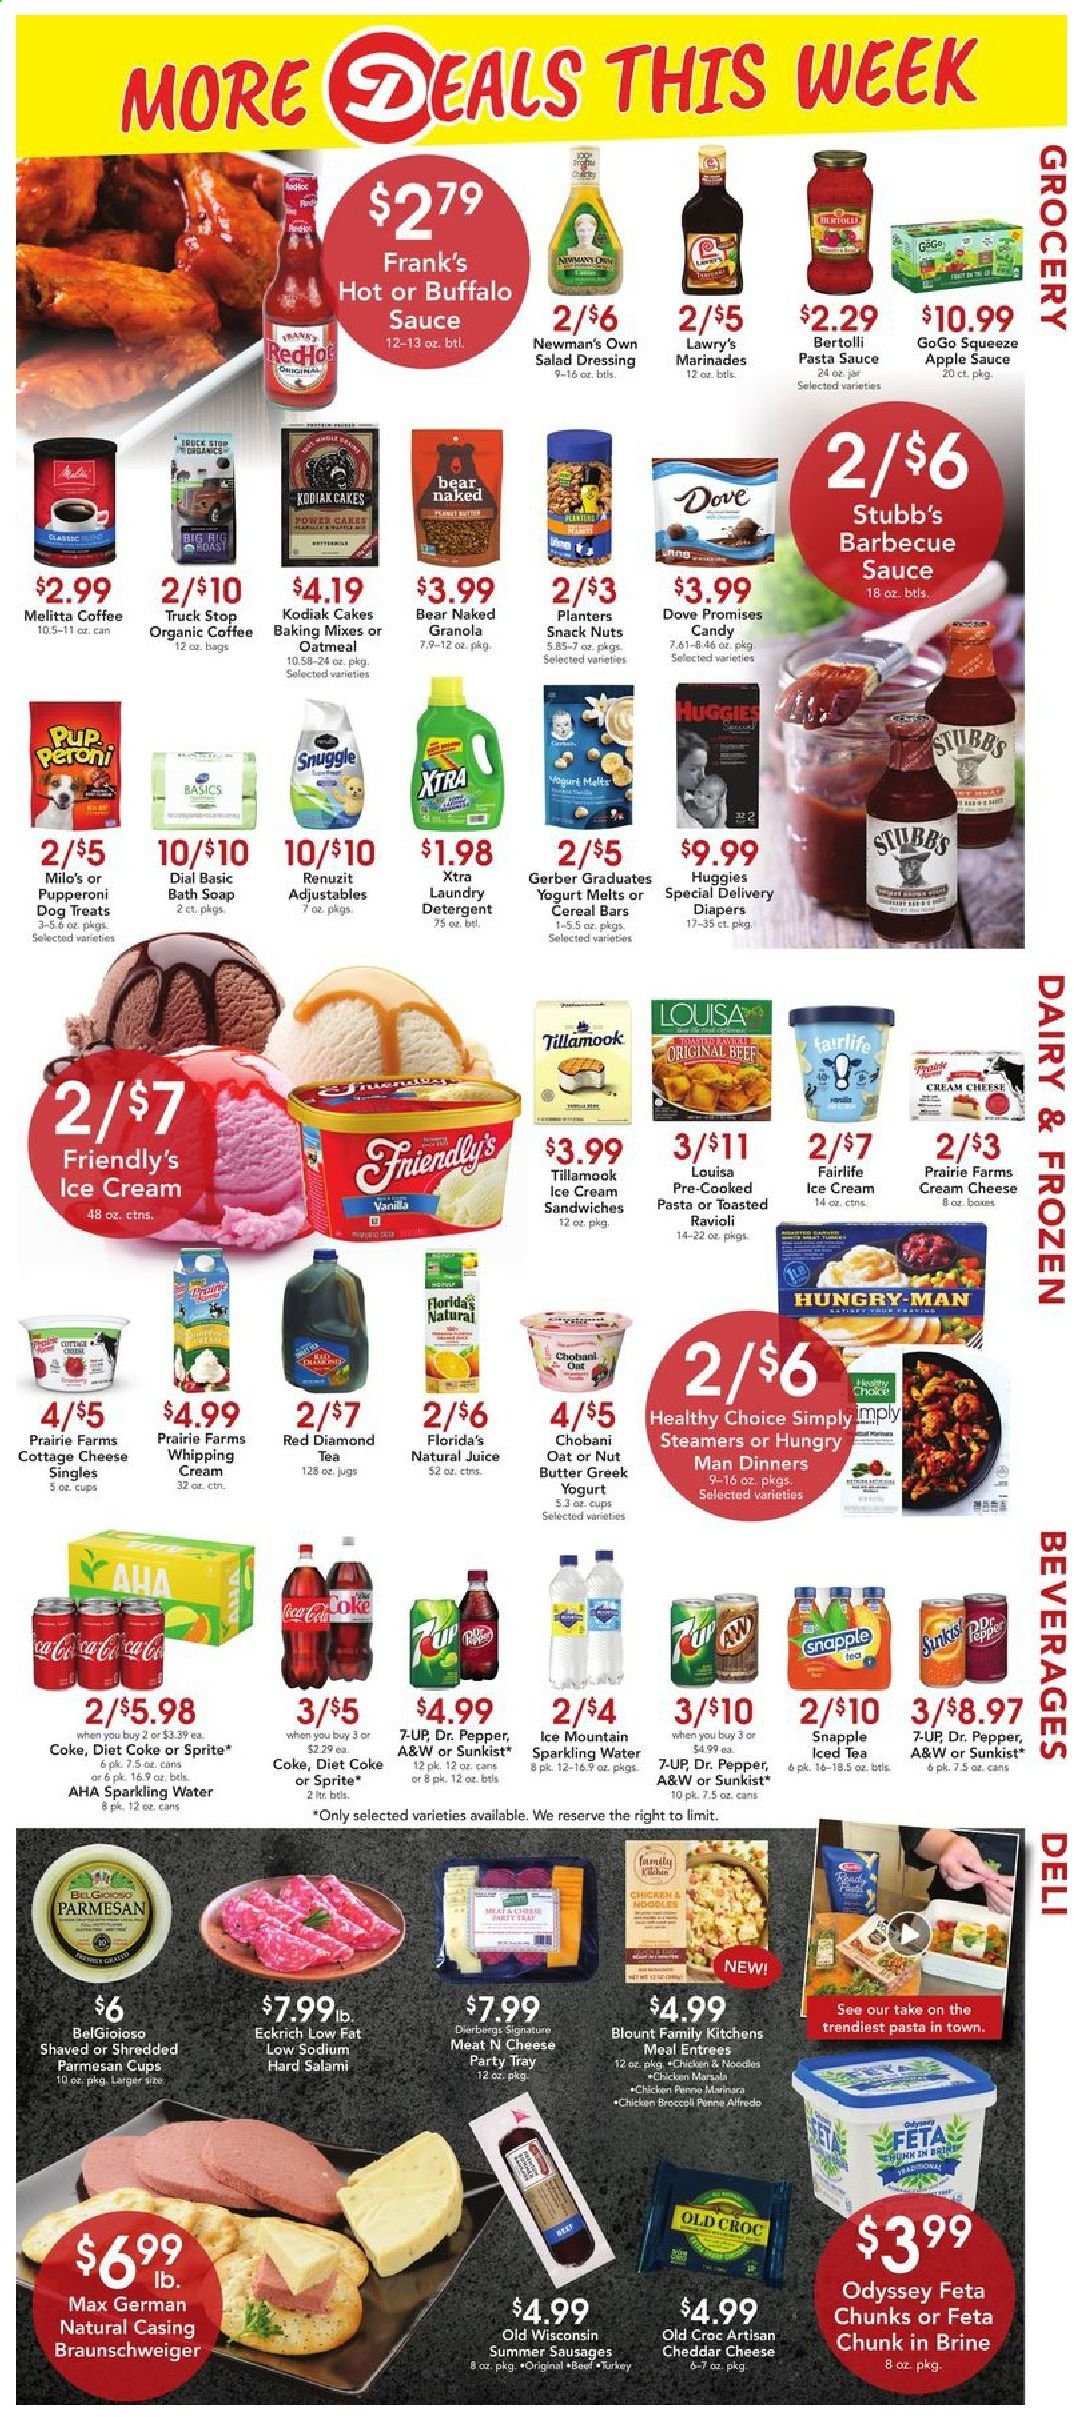 thumbnail - Dierbergs Flyer - 04/13/2021 - 04/19/2021 - Sales products - cake, pasta sauce, sauce, noodles, Healthy Choice, Bertolli, salami, sausage, cottage cheese, cheddar, parmesan, feta, greek yoghurt, yoghurt, Chobani, whipping cream, ice cream, ice cream sandwich, Friendly's Ice Cream, snack, cereal bar, Florida's Natural, Gerber, oatmeal, granola, ravioli, penne, pepper, BBQ sauce, salad dressing, dressing, apple sauce, nut butter, Planters, Coca-Cola, Sprite, juice, Dr. Pepper, Diet Coke, 7UP, Snapple, Milo's, A&W, sparkling water, Ice Mountain, organic coffee, Peroni, Huggies. Page 6.